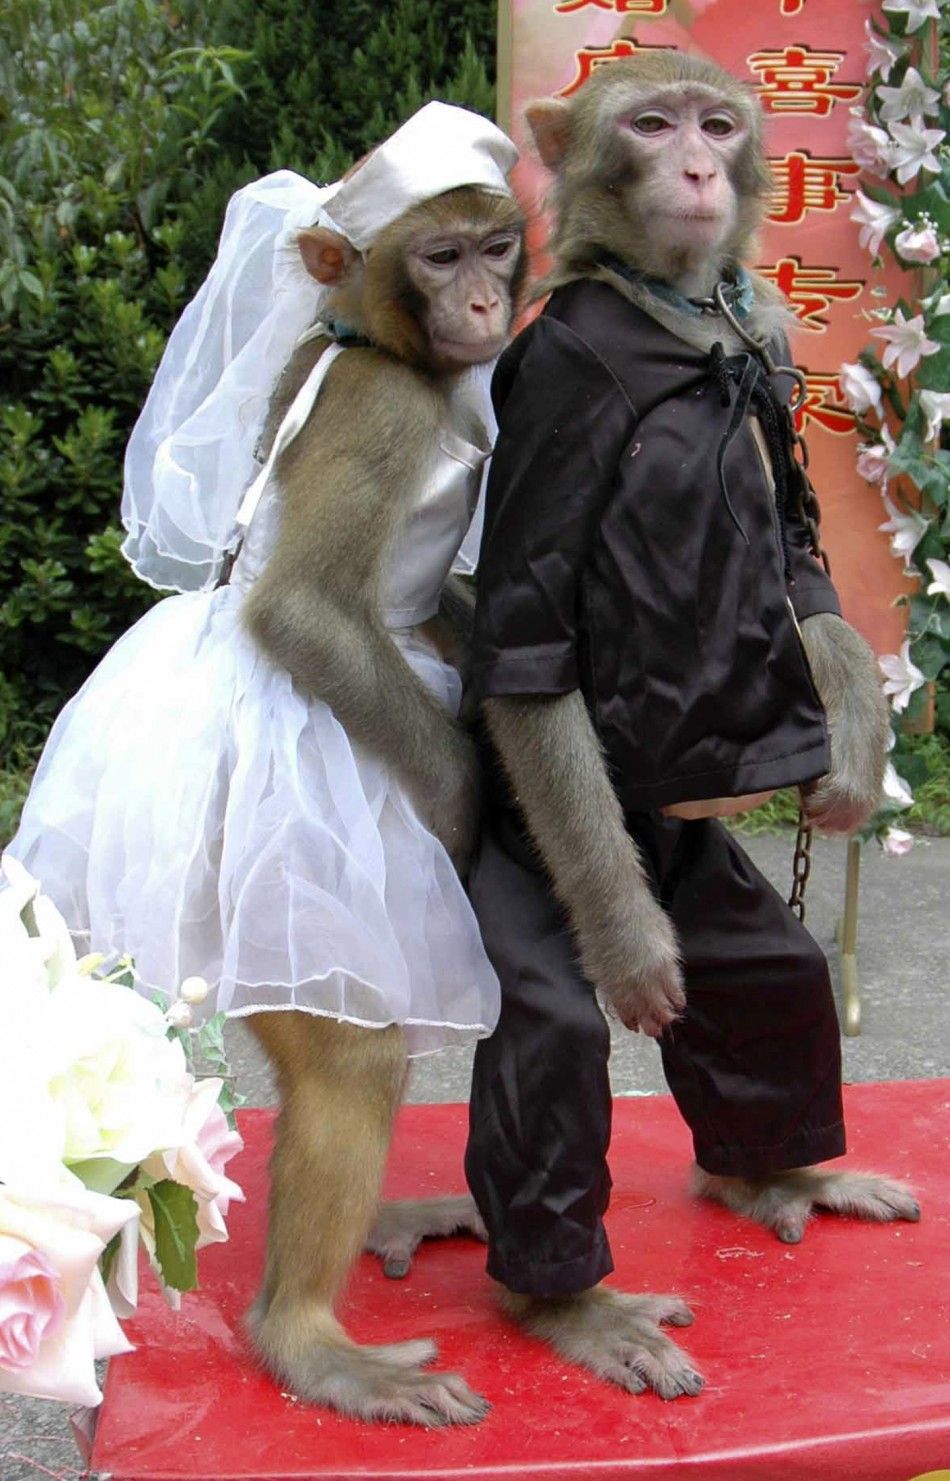 Male monkey and female monkey are seen during special wedding ceremony at zoo in Wenling